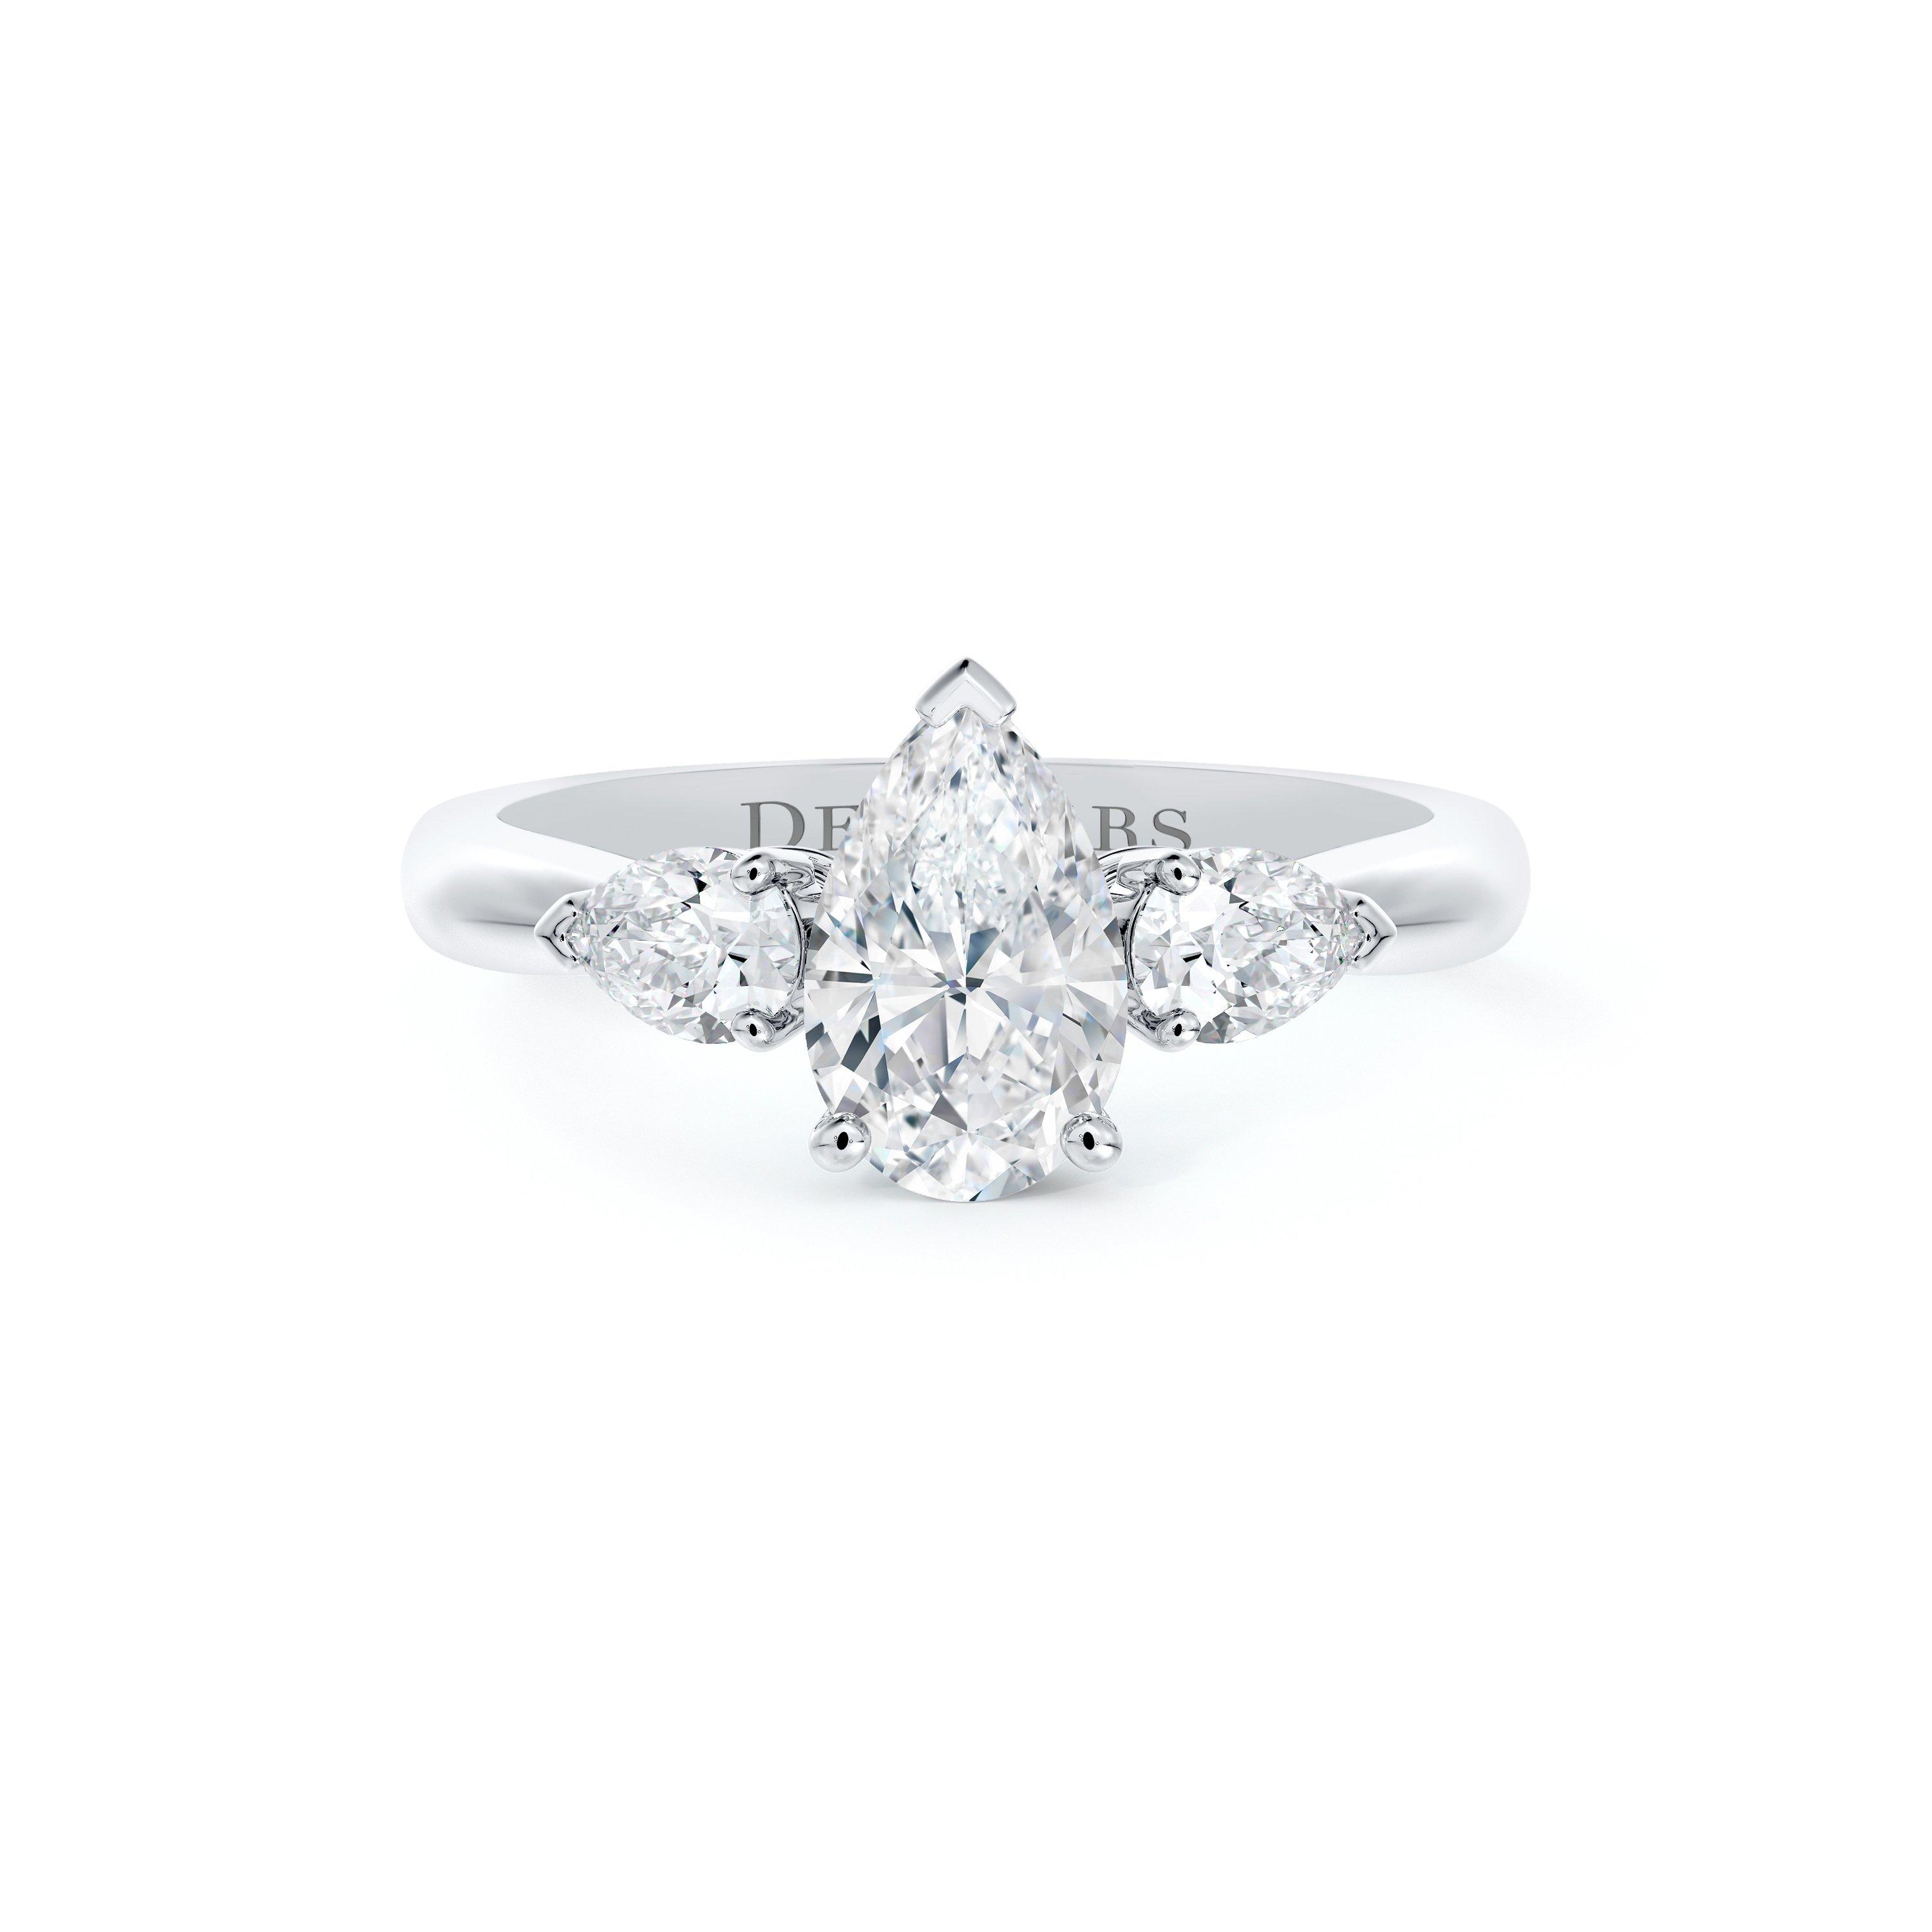 DB Classic Pear-Shaped Centre with Pear-Shaped Side Stones Diamond Ring